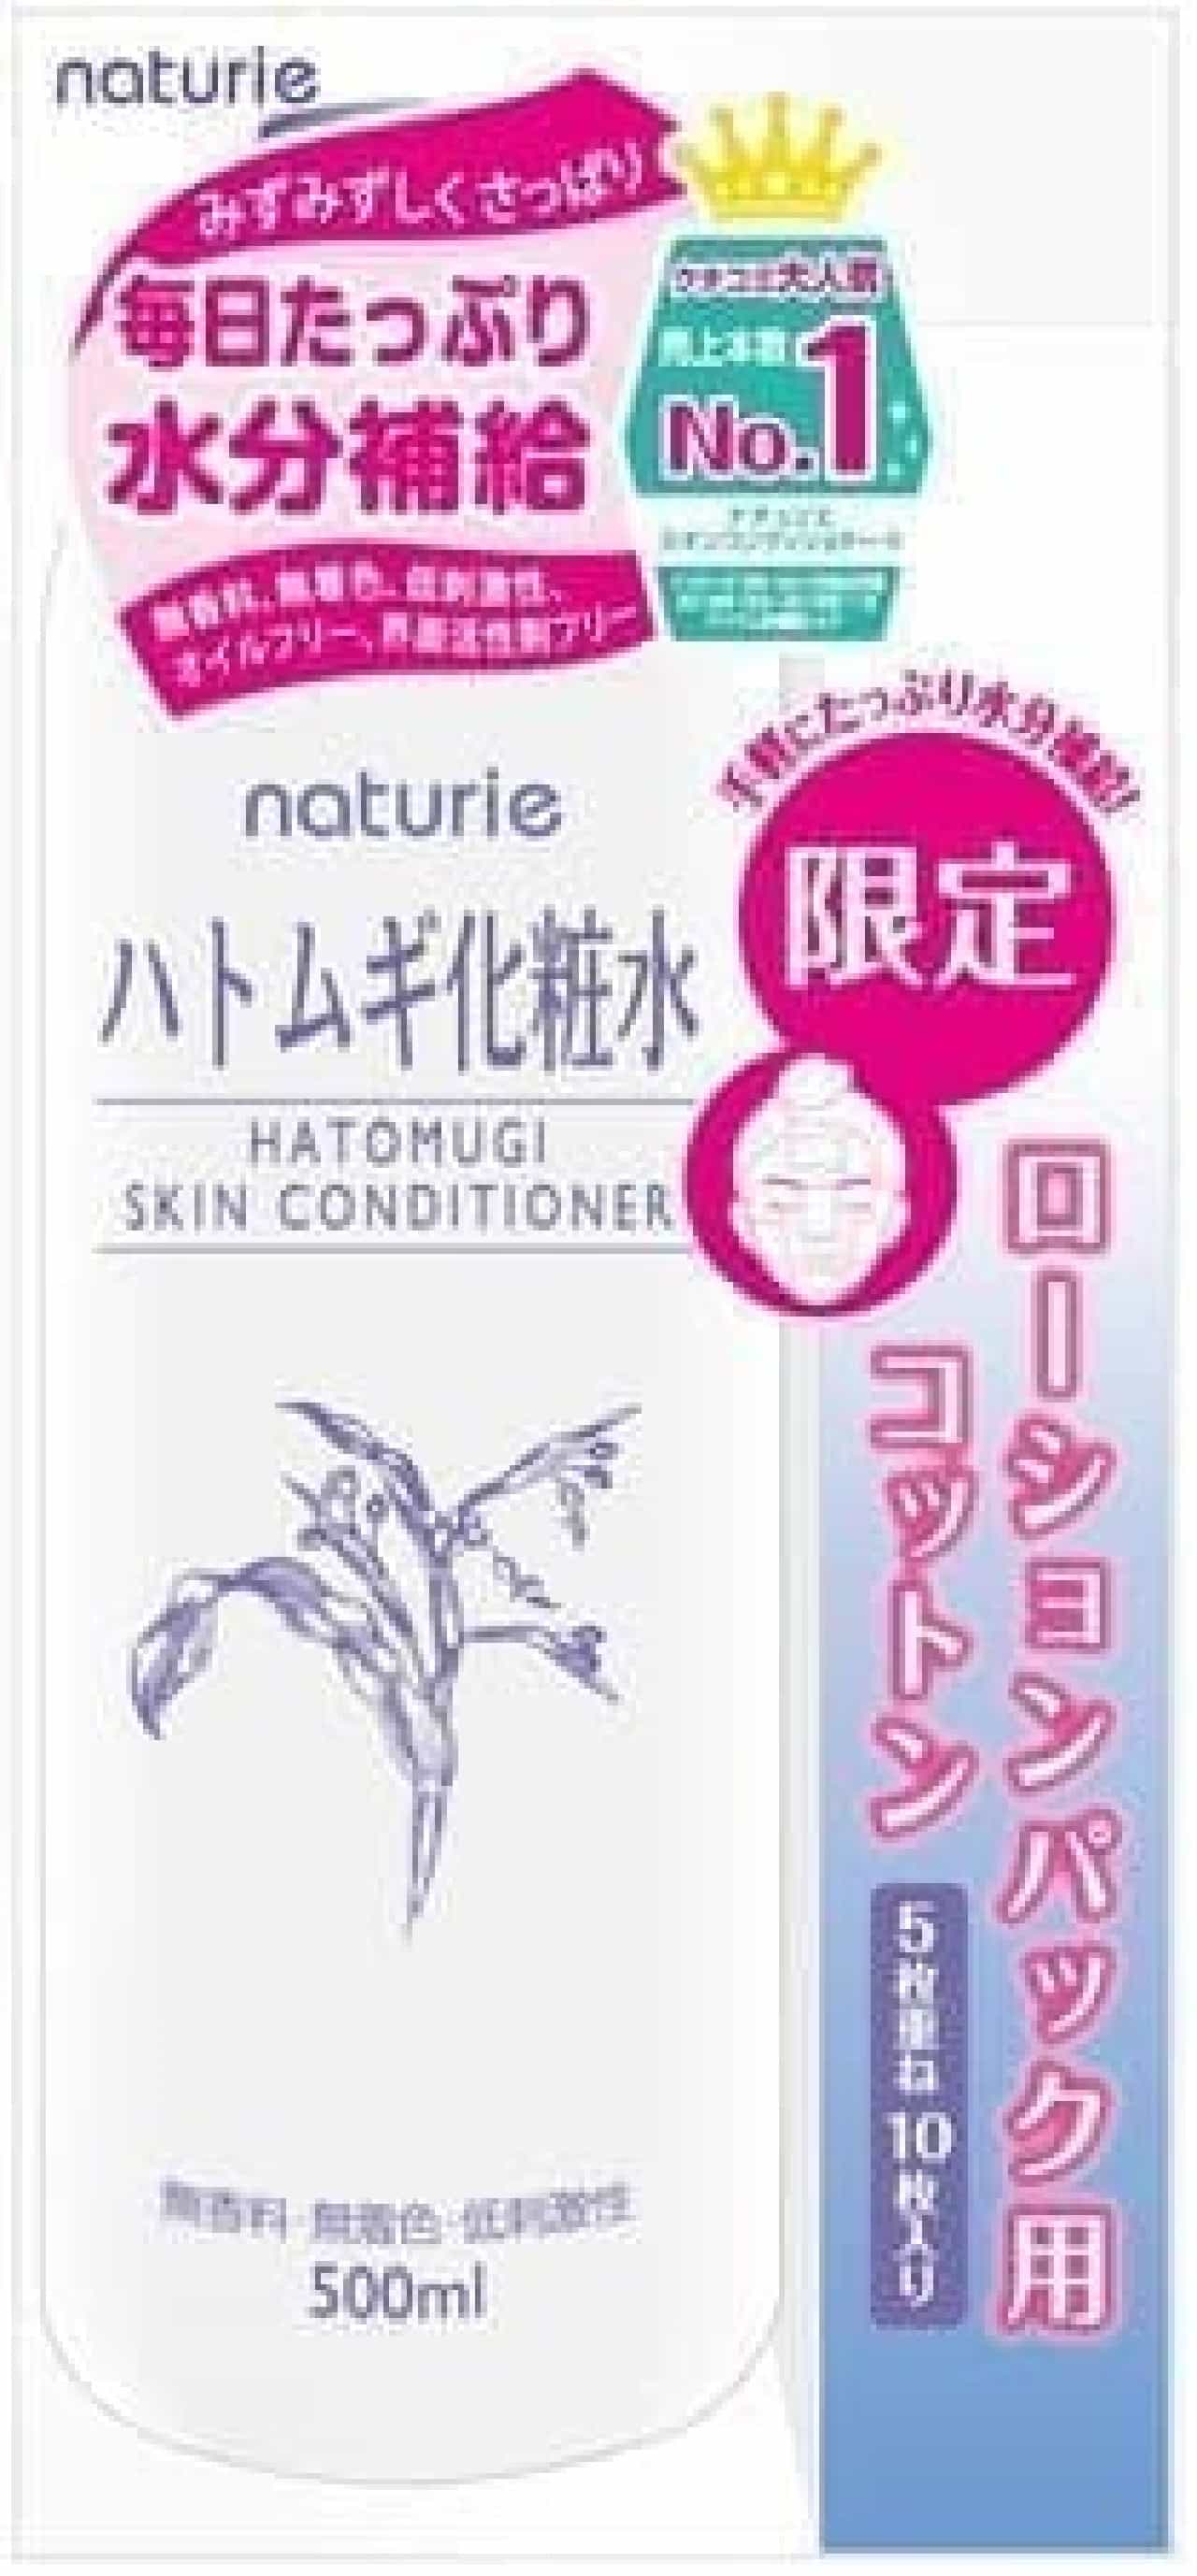 Naturie Coix lotion limited lotion pack with cotton